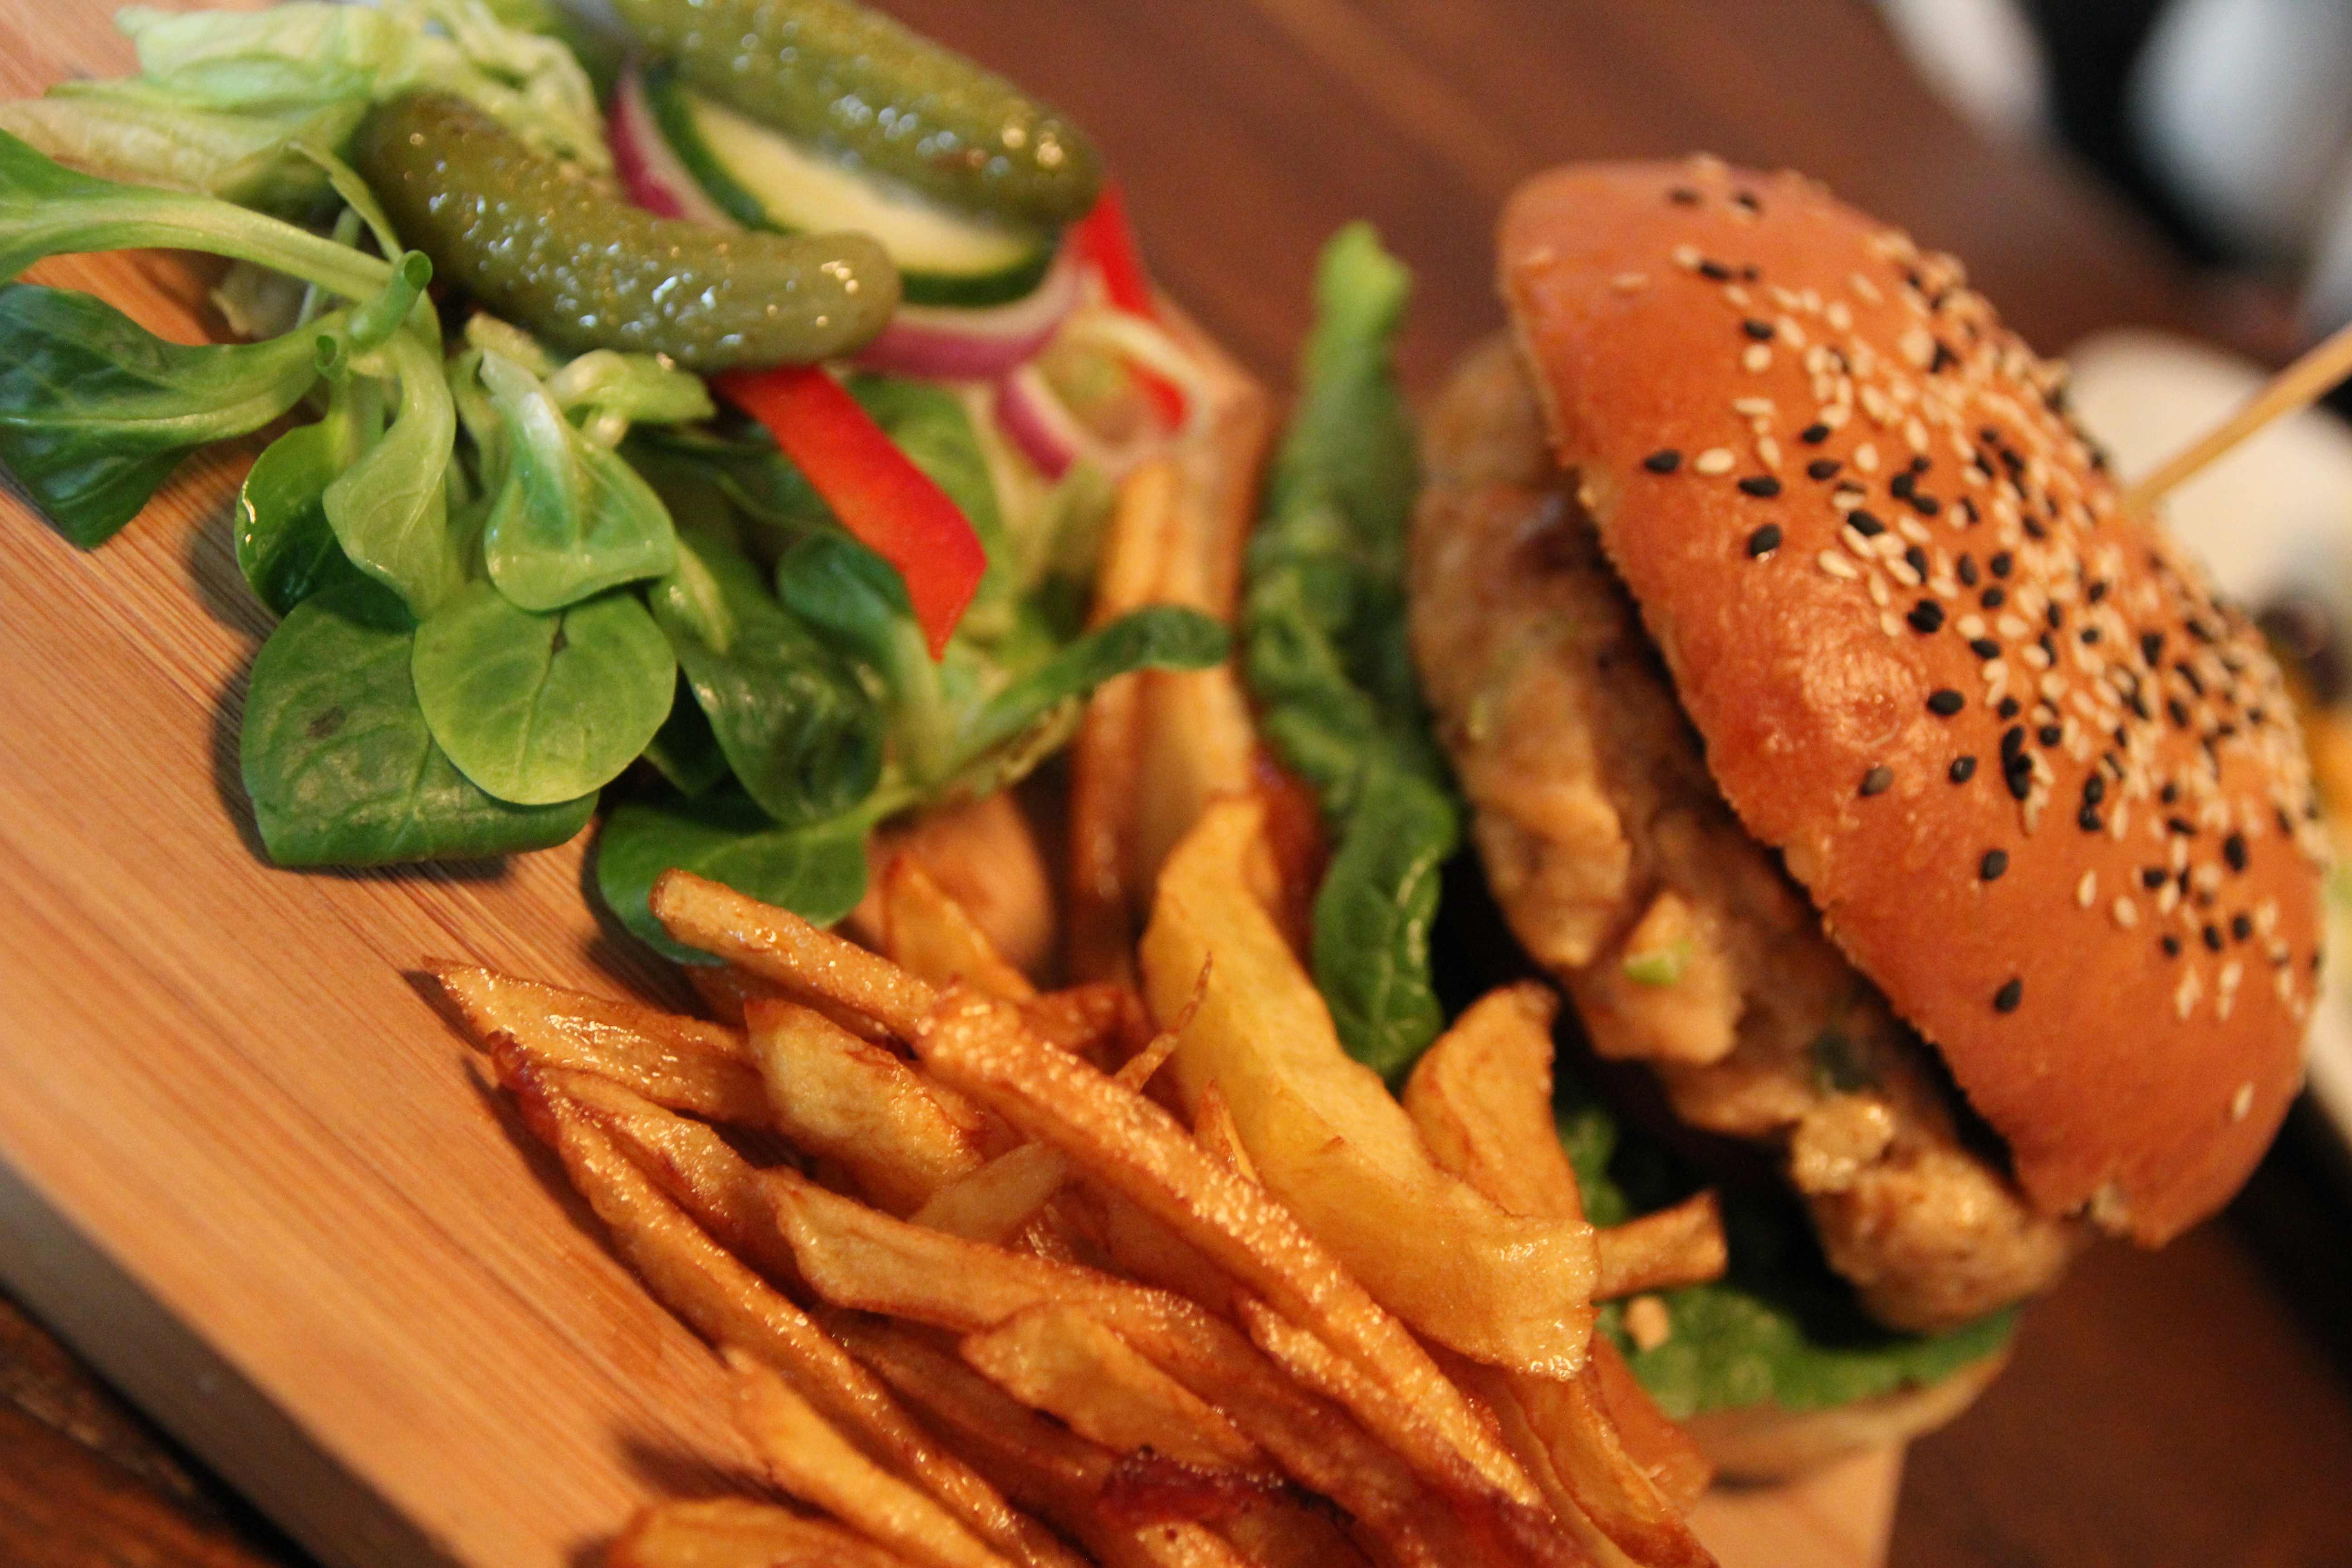 Burger French Fries Pickle Salad 5184x3456